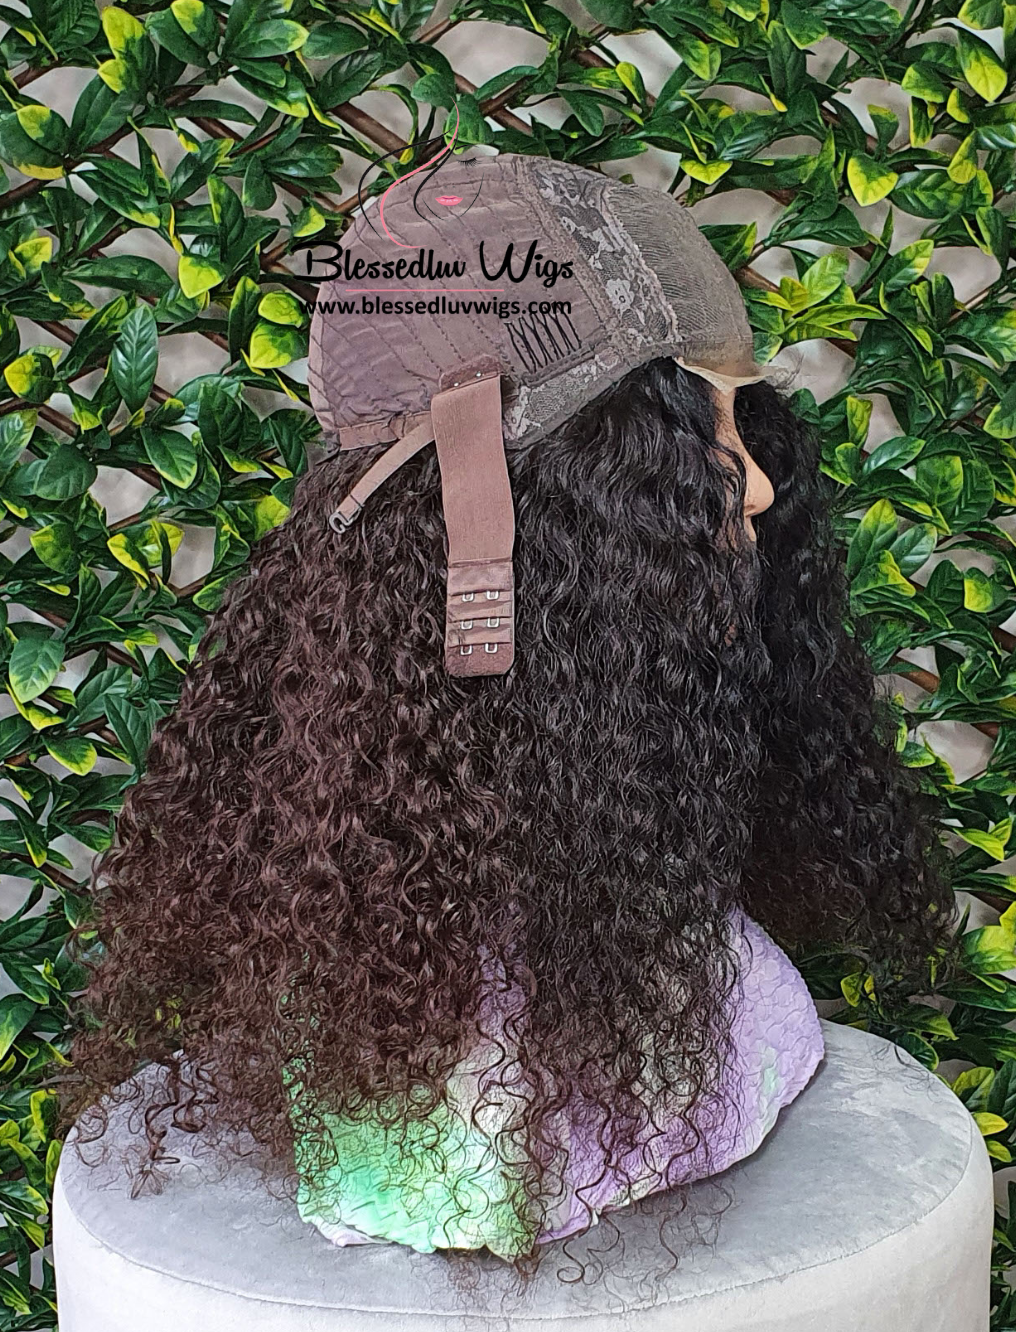 Natalia - Raw Blessedluv Curly Lace Closure Wig- Wig Lace has been Tinted-www.brazilianweave.com-Brazilianweave.com